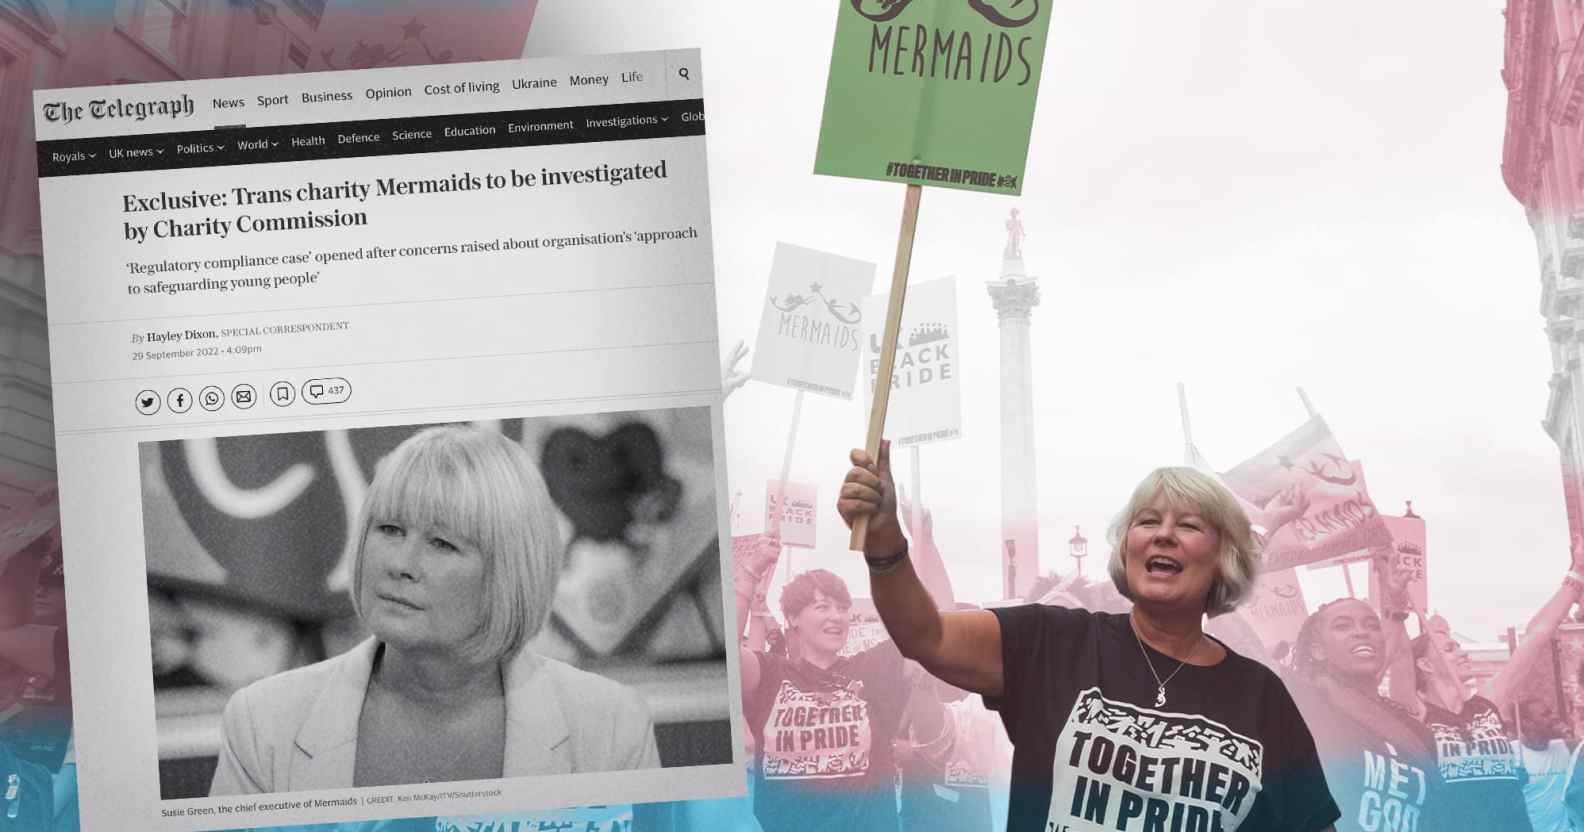 A screenshot of a Telegraph article with a picture of the CEO of Mermaids on the right holding a placard